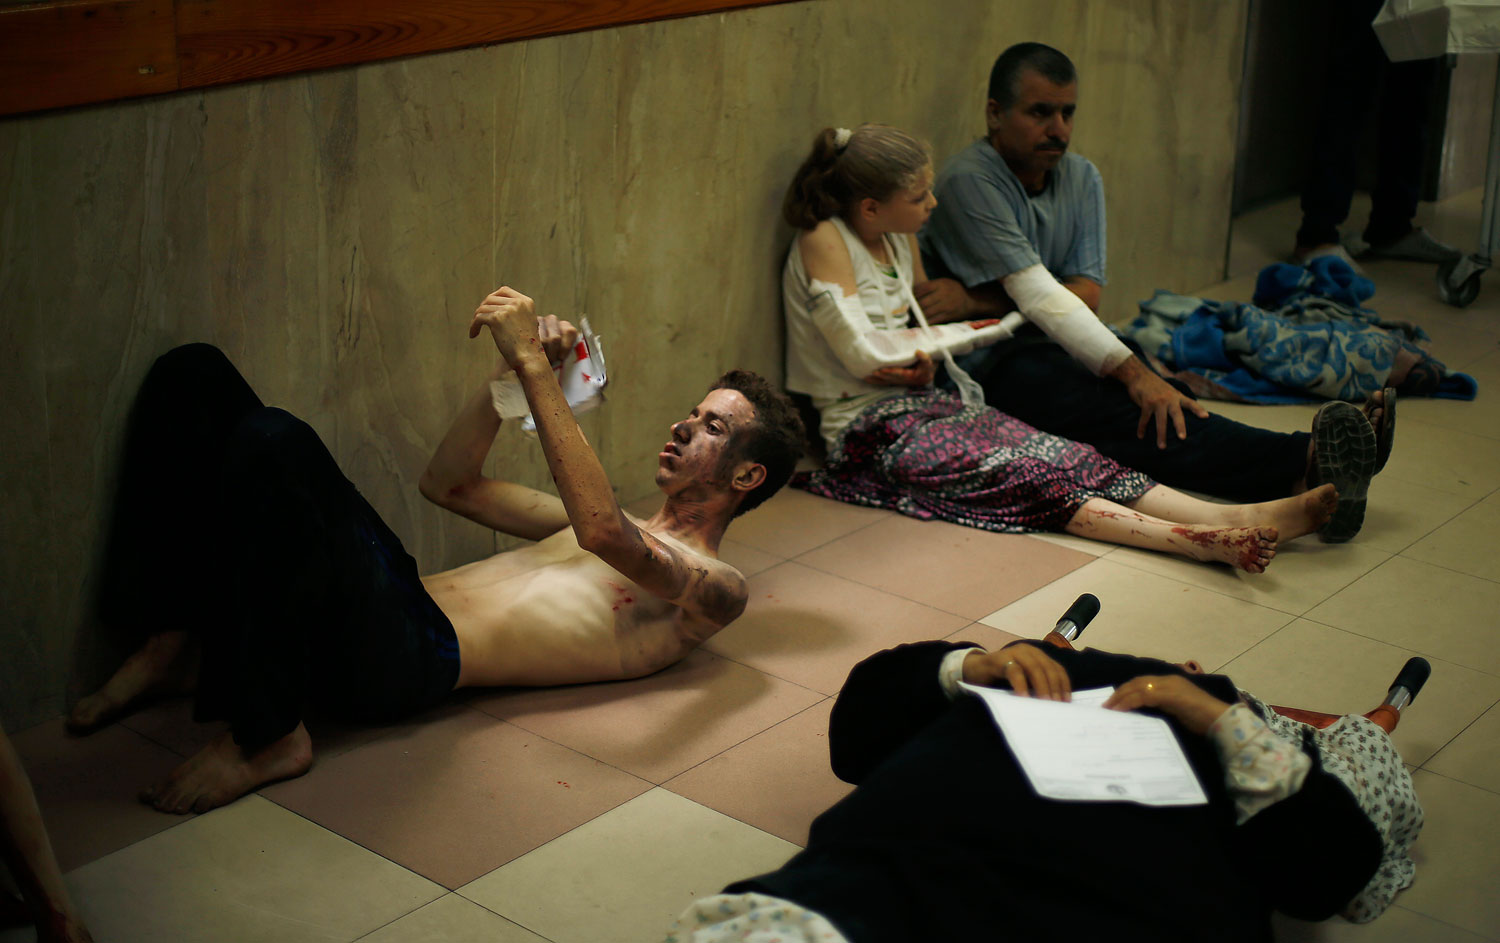 Palestinians, who medics said were wounded during heavy Israeli shelling, sit at a hospital in Gaza City